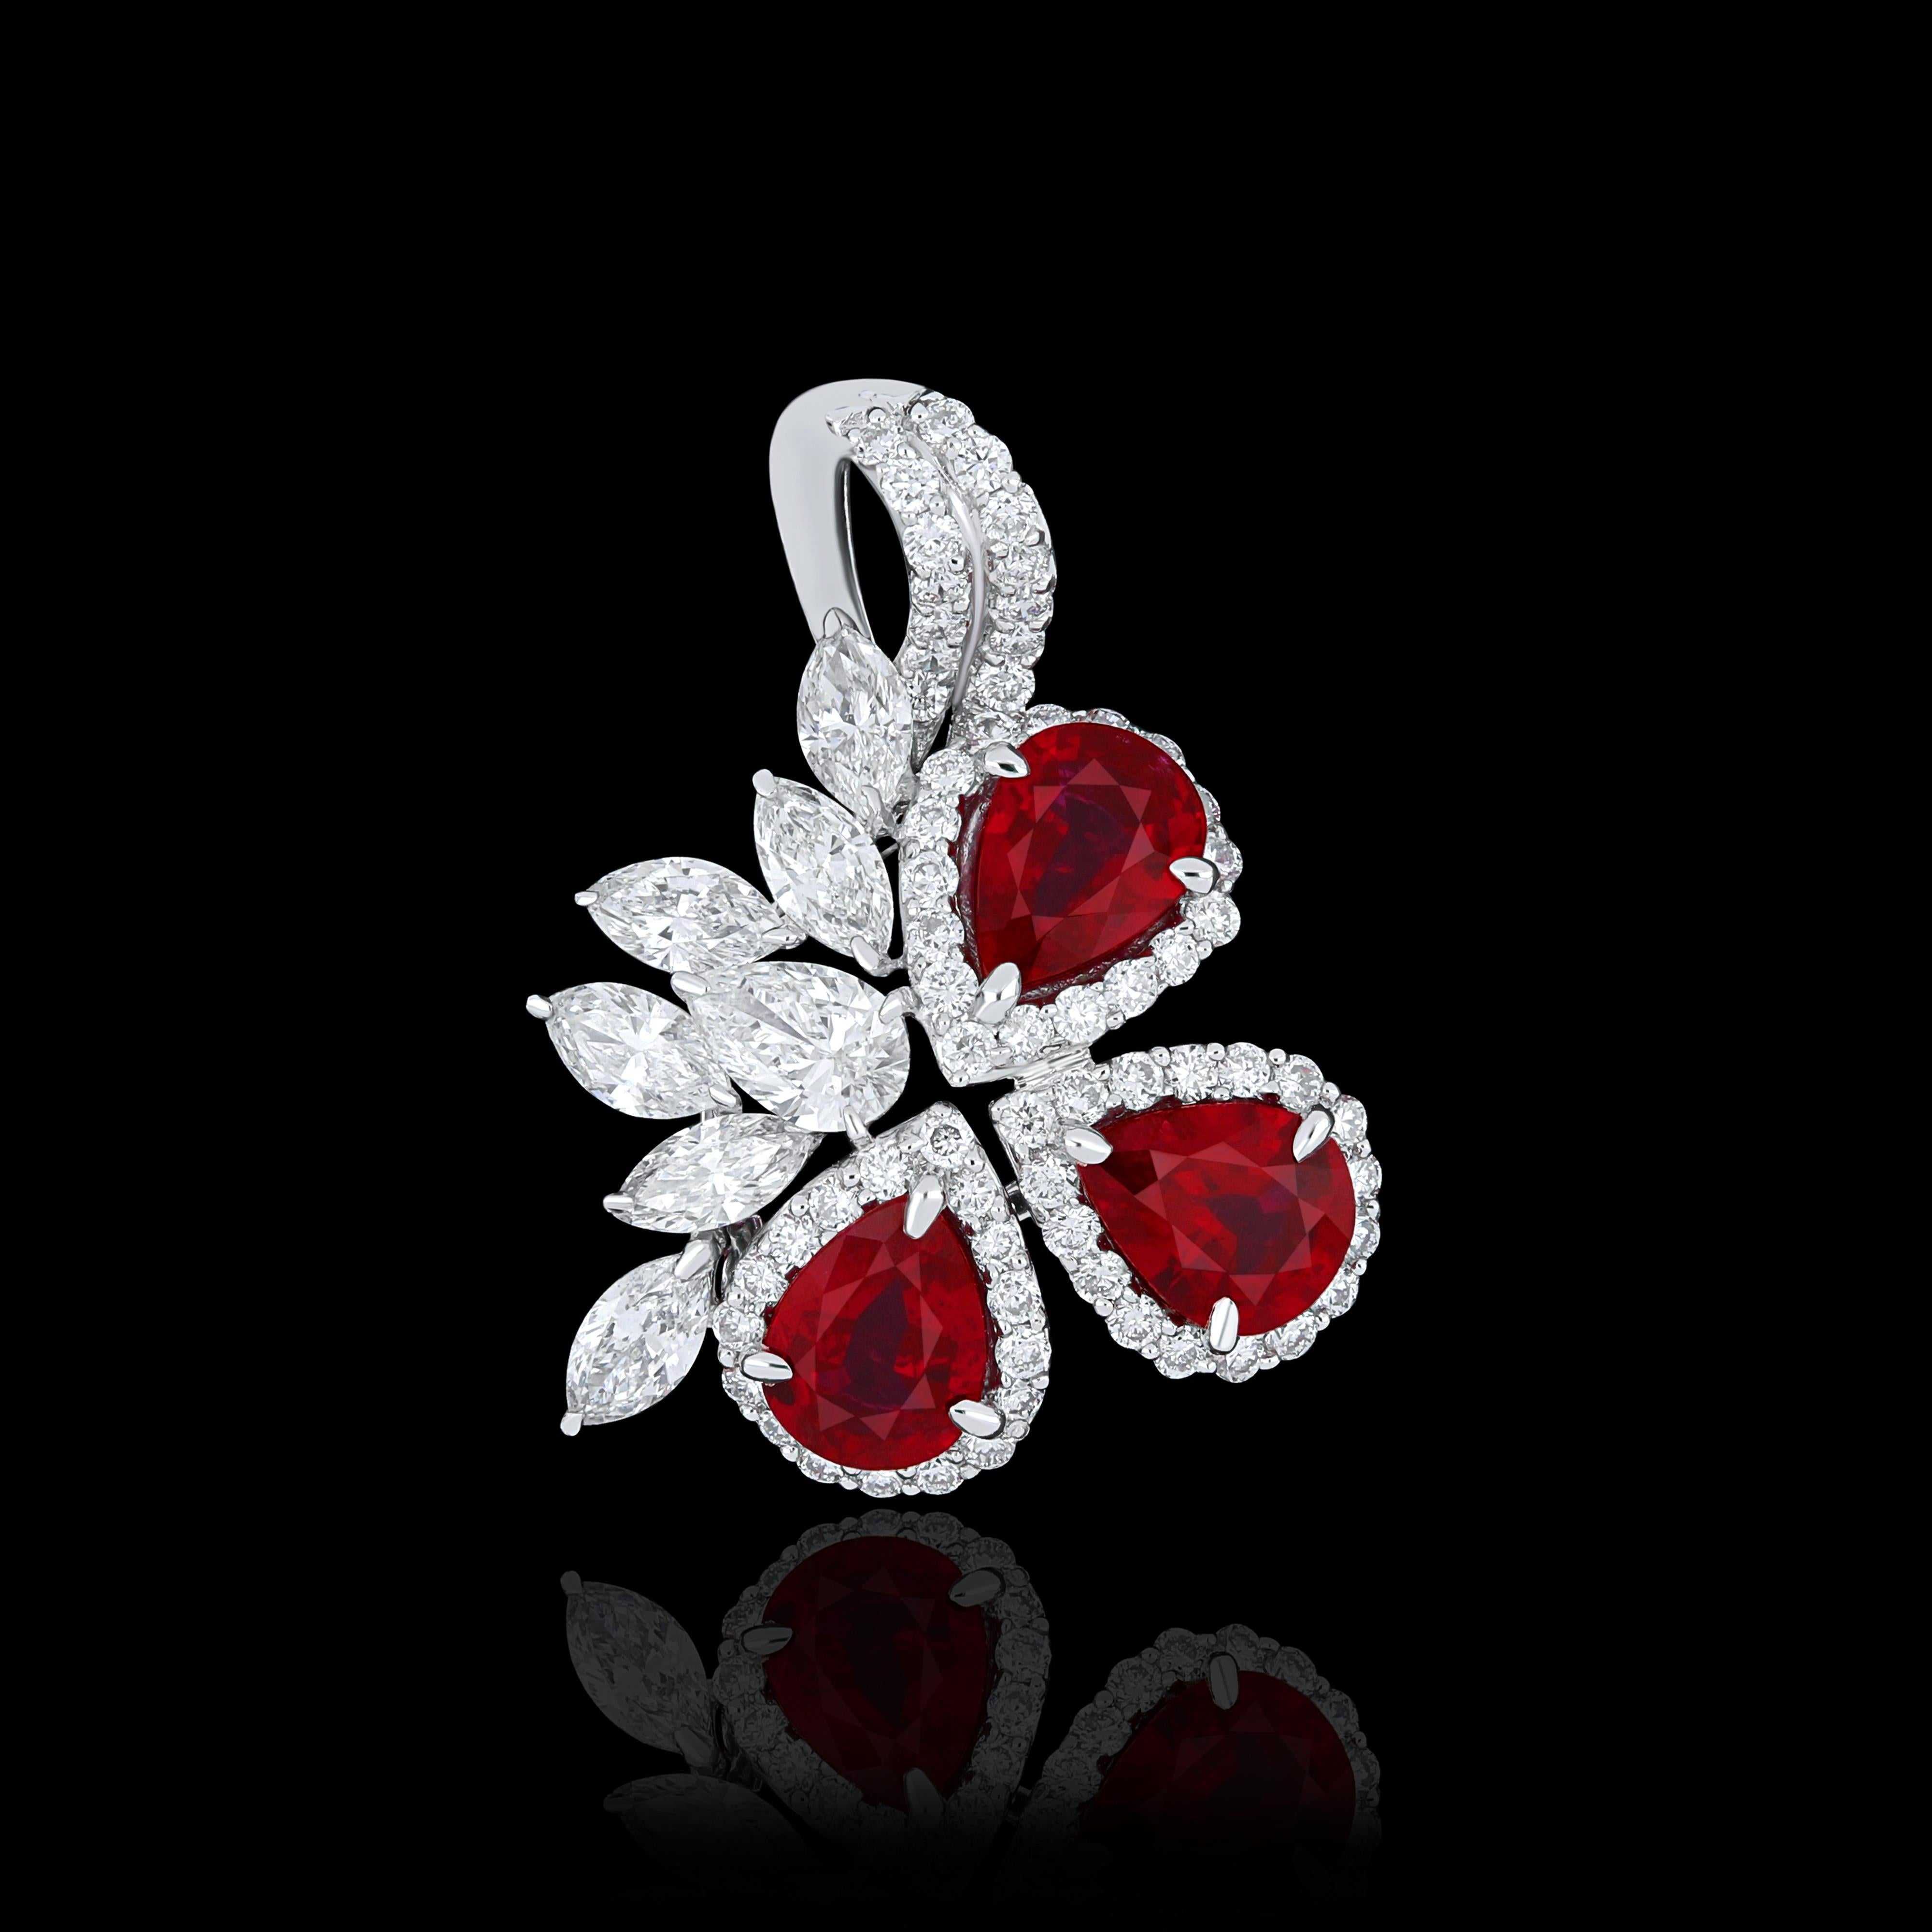 Elegant and exquisitely detailed 18 Karat White Gold Pendant, center set with 0.86Cts .Pear Shape Ruby  and micro pave set Diamonds, weighing approx. 0.71Cts Beautifully Hand crafted in 18 Karat White Gold.

Stone Detail:
Ruby: 5x4MM

Stone